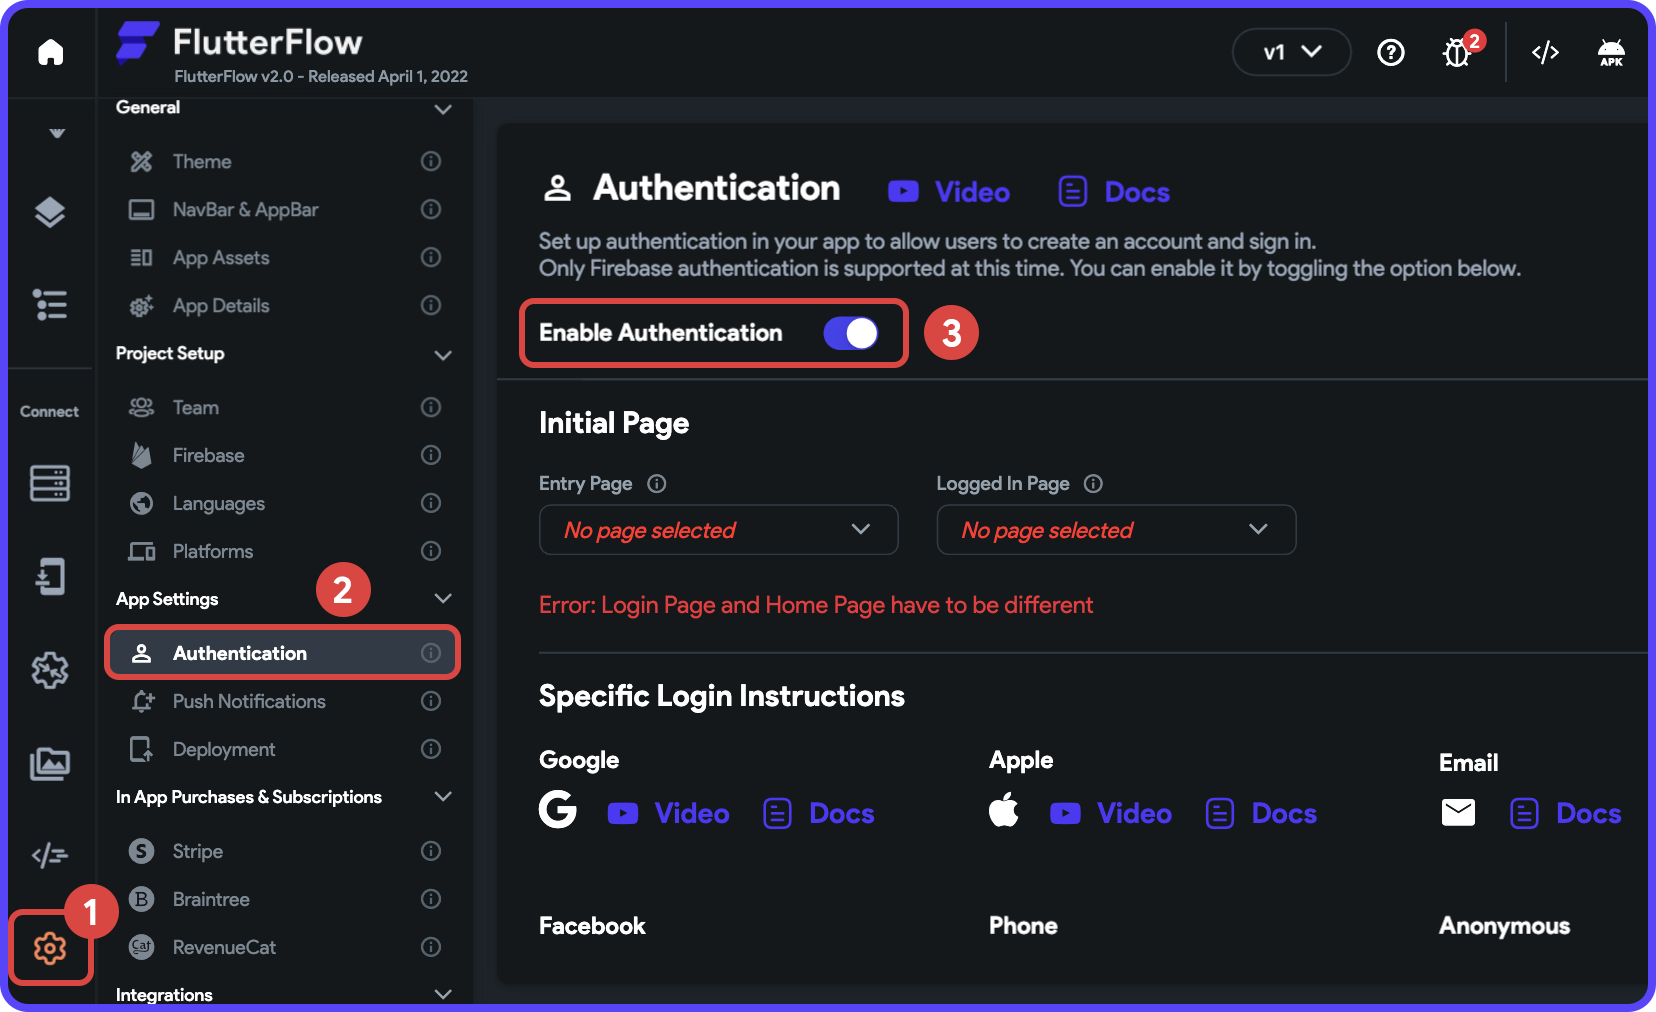 FlutterFlow Authentication page under Settings and Integrations